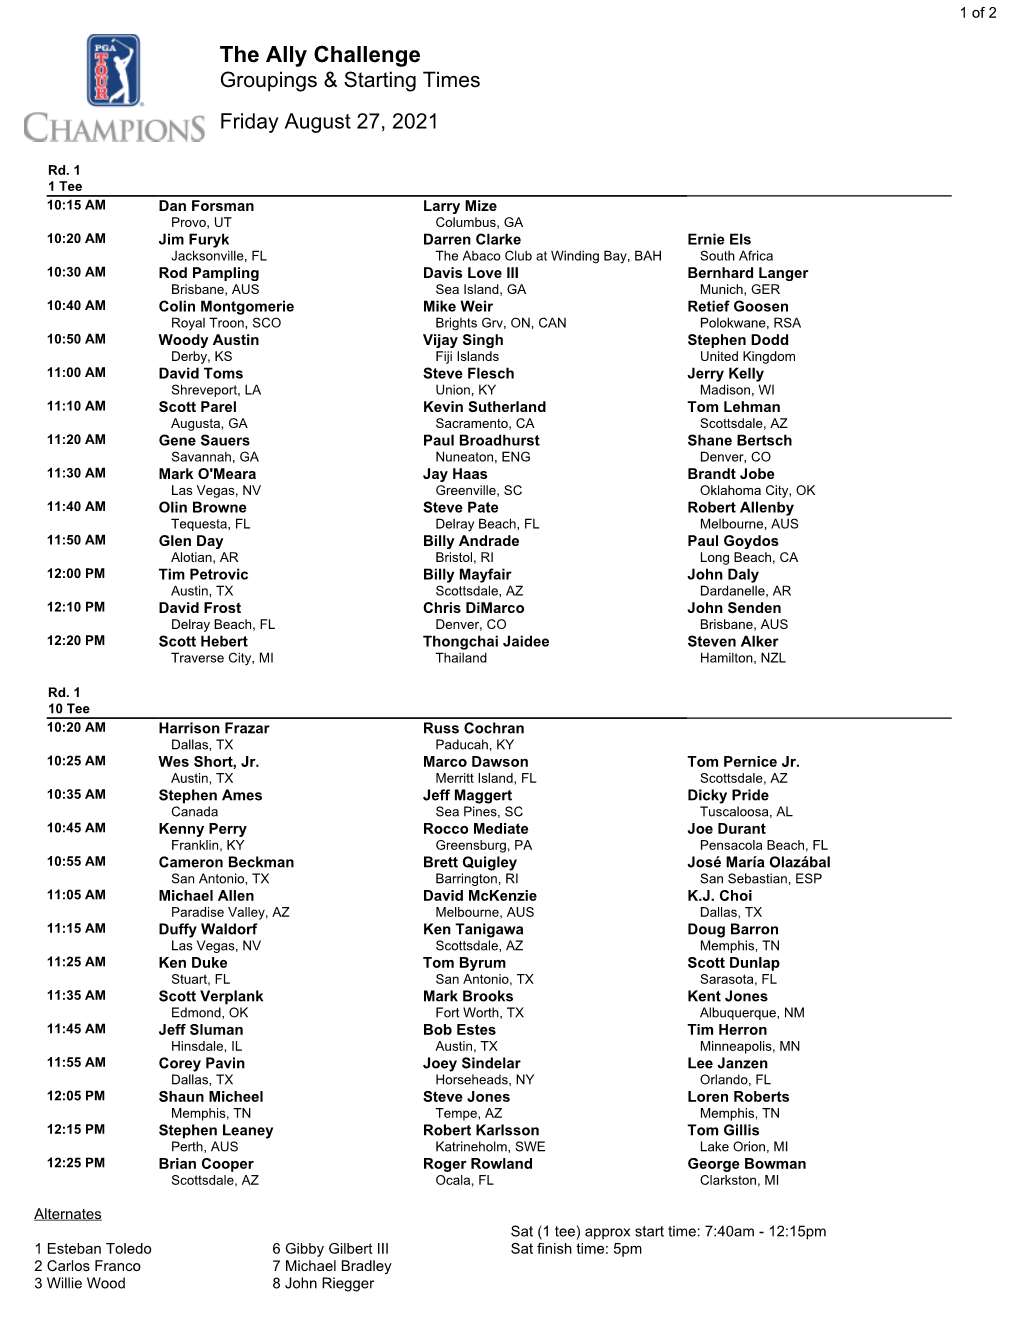 The Ally Challenge Groupings & Starting Times Friday August 27, 2021